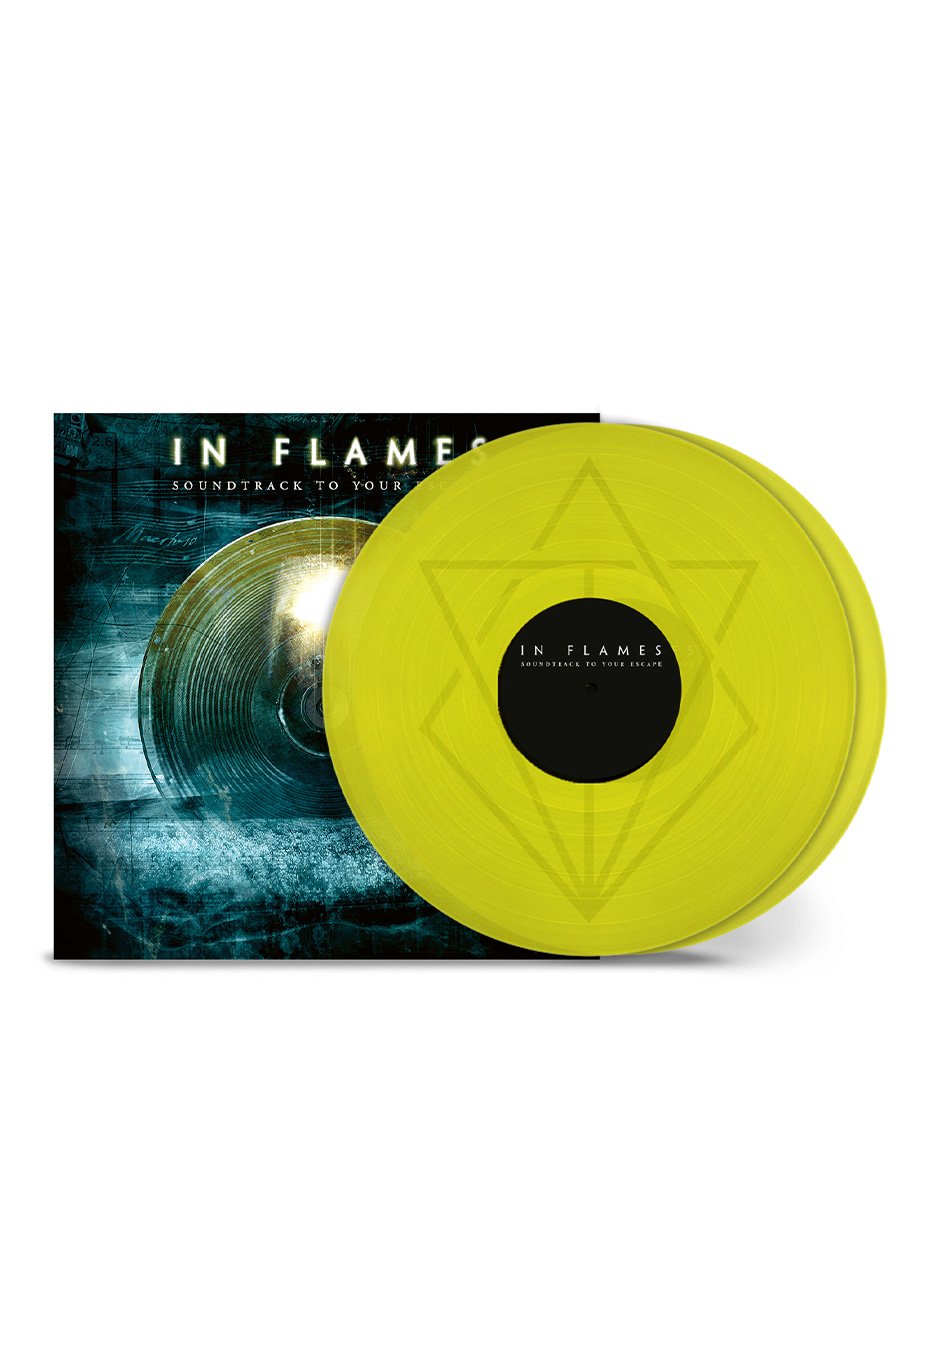 In Flames - Soundtrack To Your Escape (20th Anniversary) Transparent Yellow - Colored 2 Vinyl